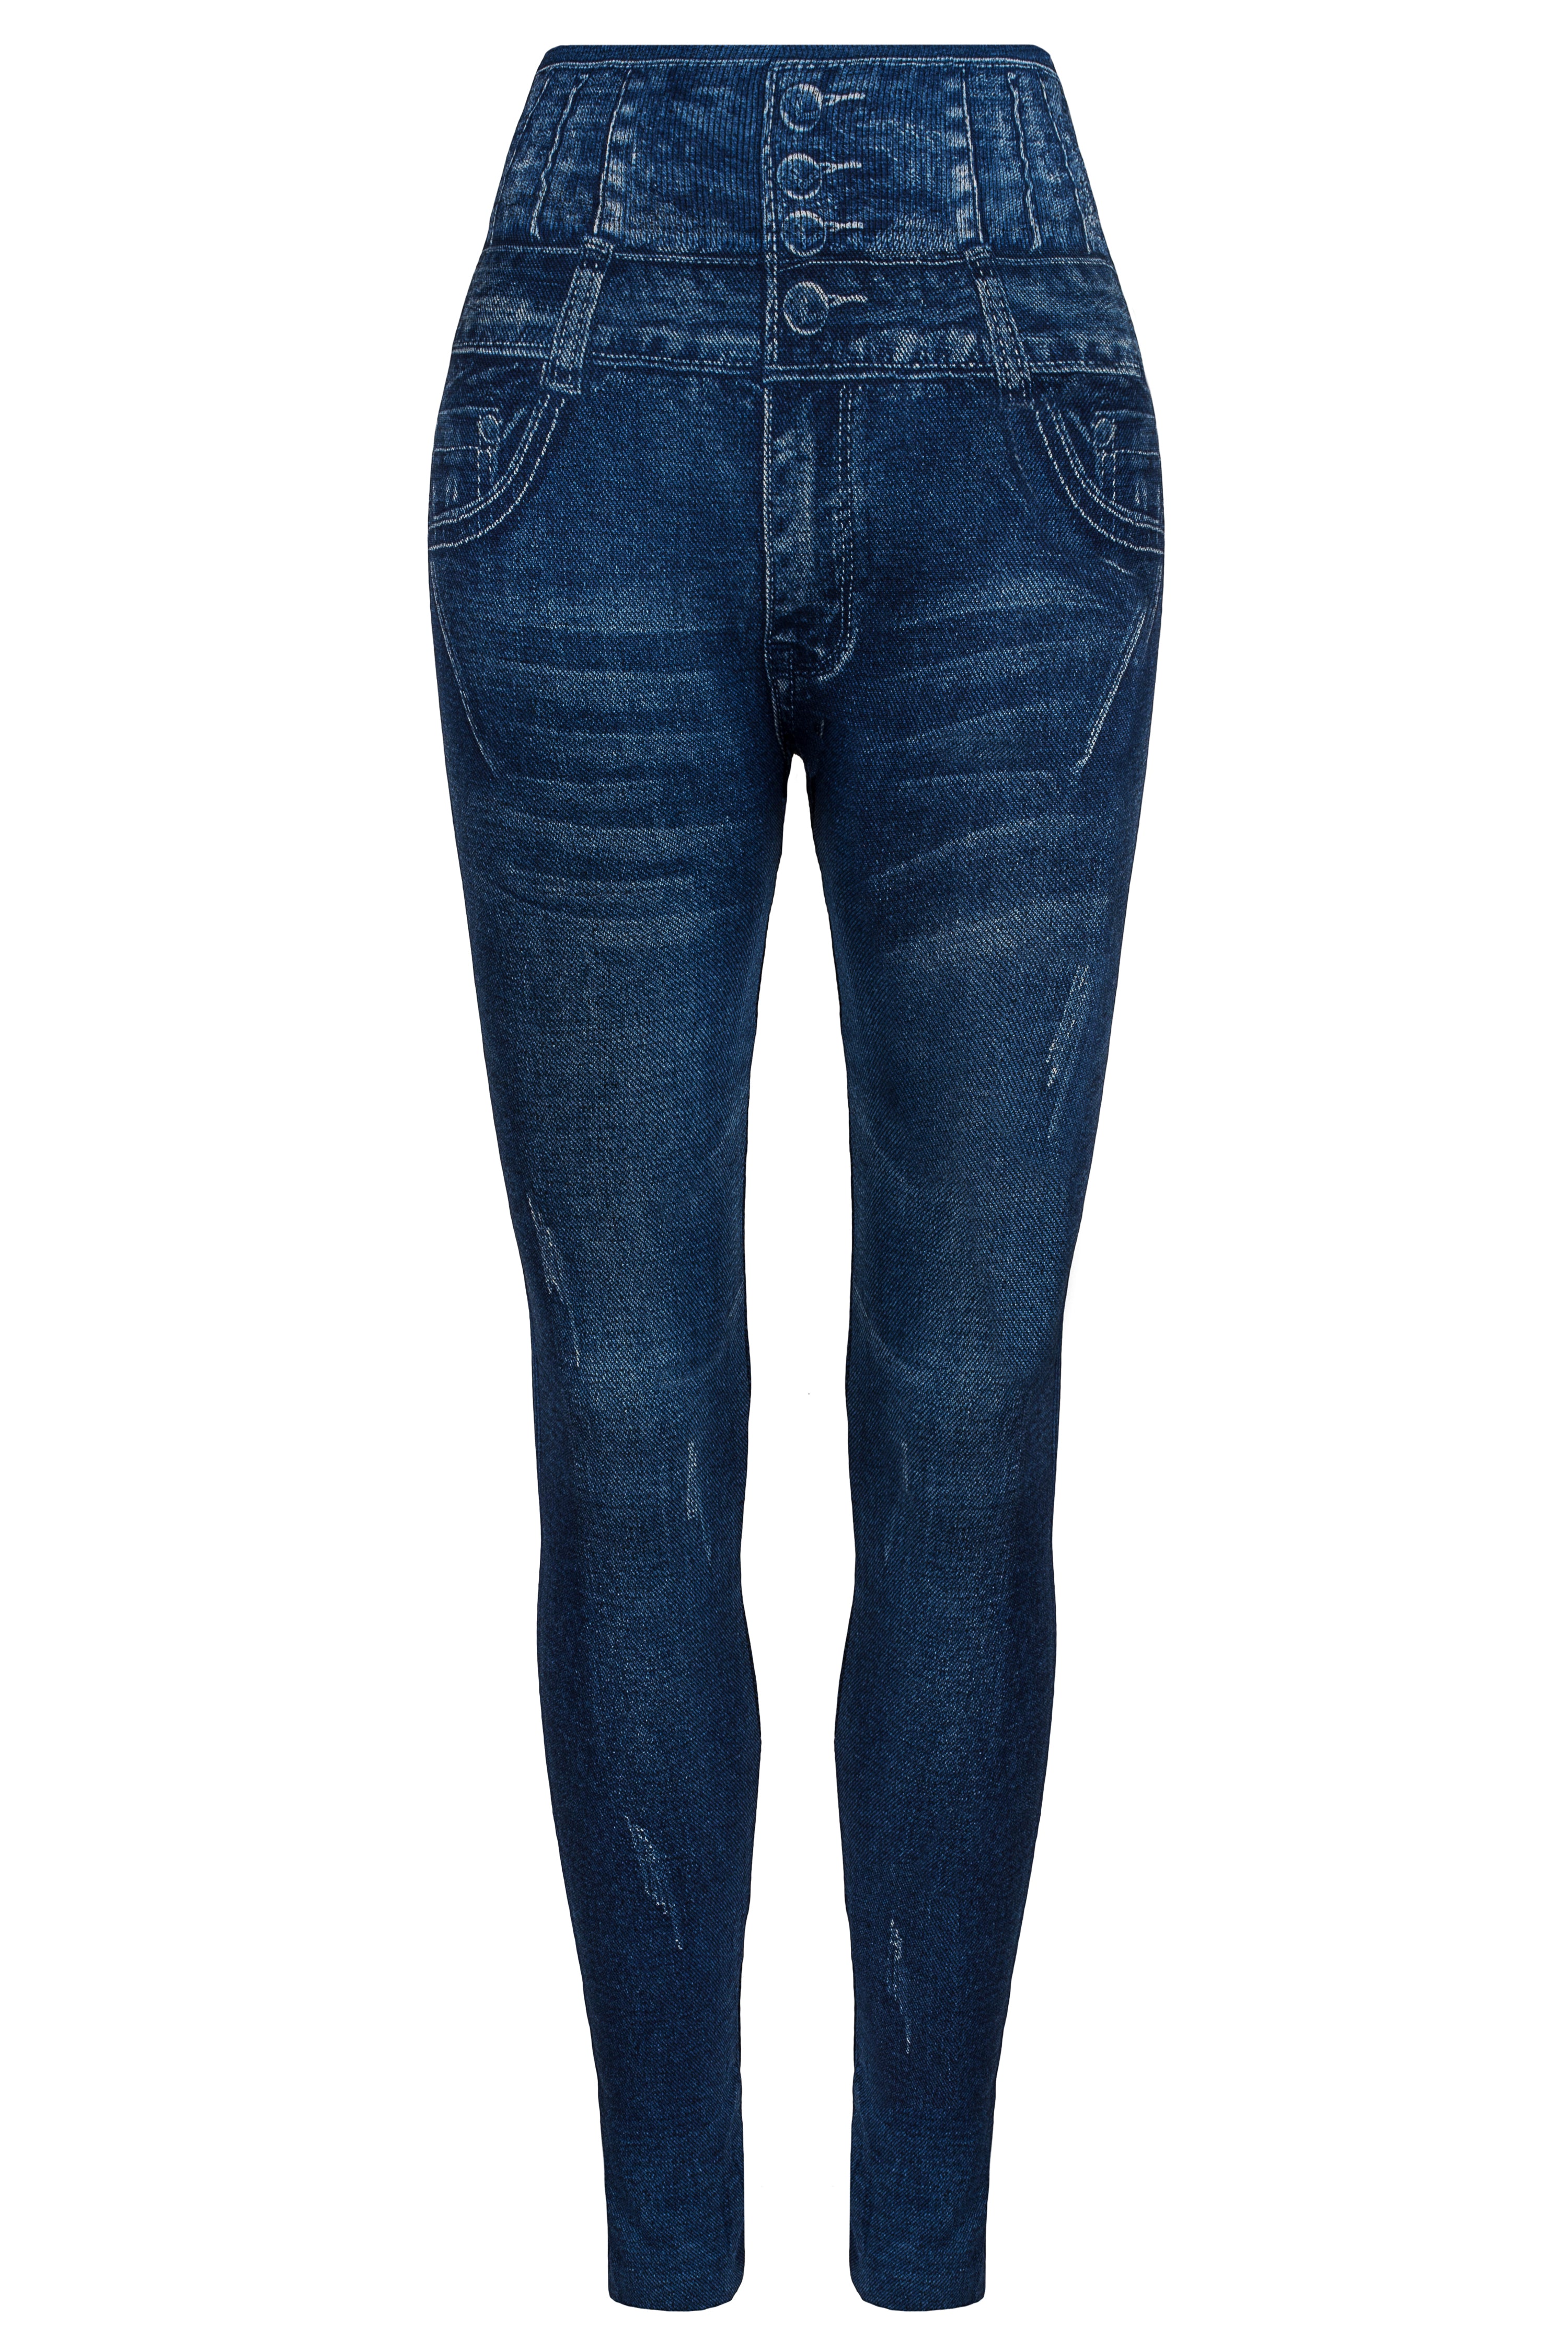 What Is the Difference Between Jeans, Leggings, Jeggings And Treggings?